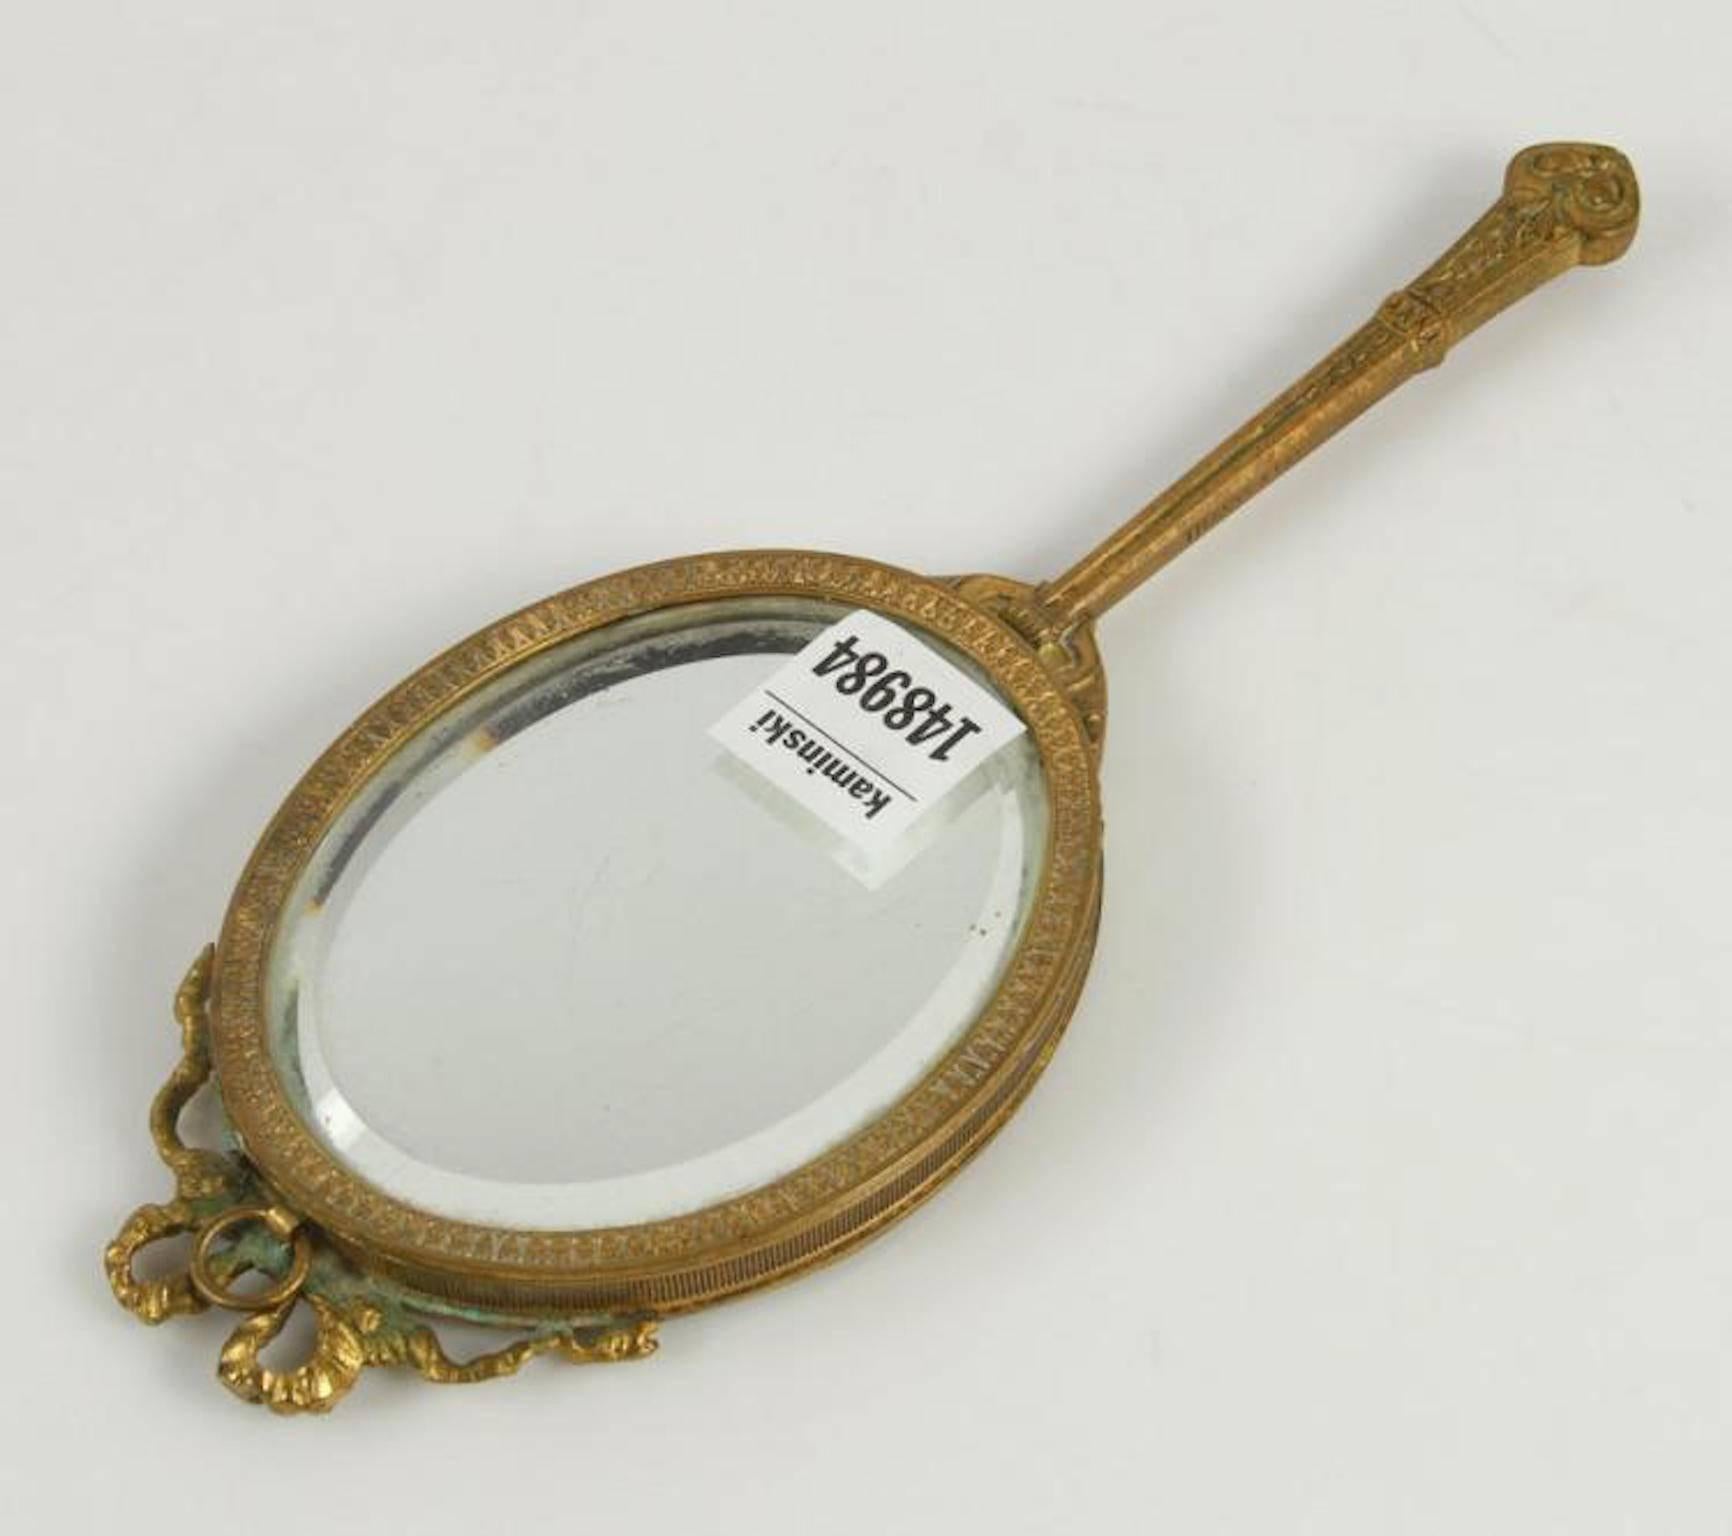 Tiffany & Co small bronze hand mirror, beveled, framed and lidded. Measures: 9 1/4" H x 3 3/8" W.